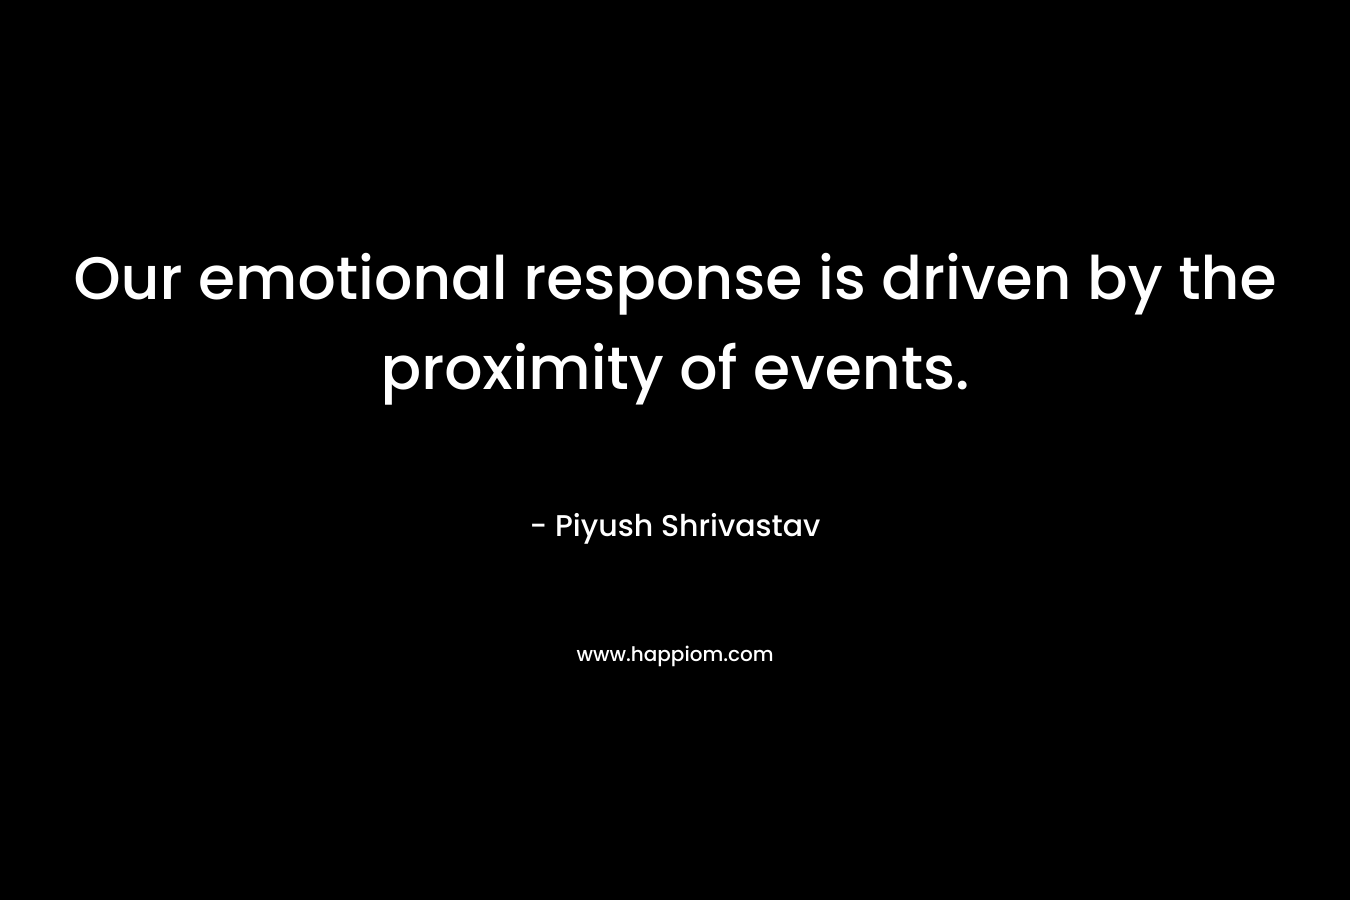 Our emotional response is driven by the proximity of events. – Piyush Shrivastav